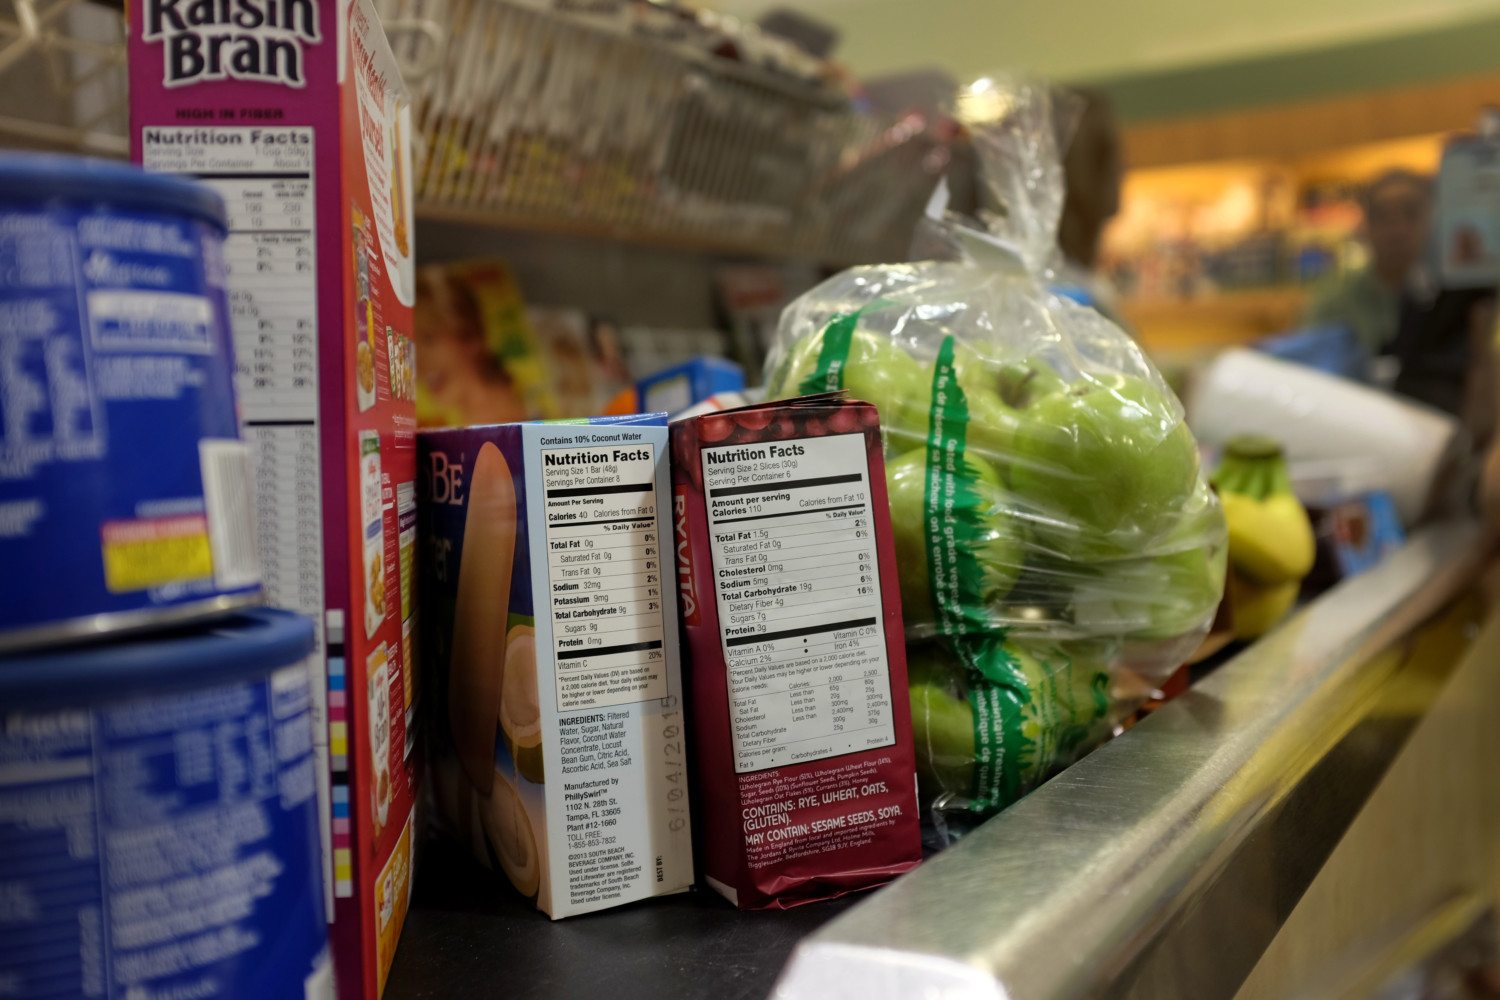 Government Proposes Improving Nutrition Facts Labeling On Food Products